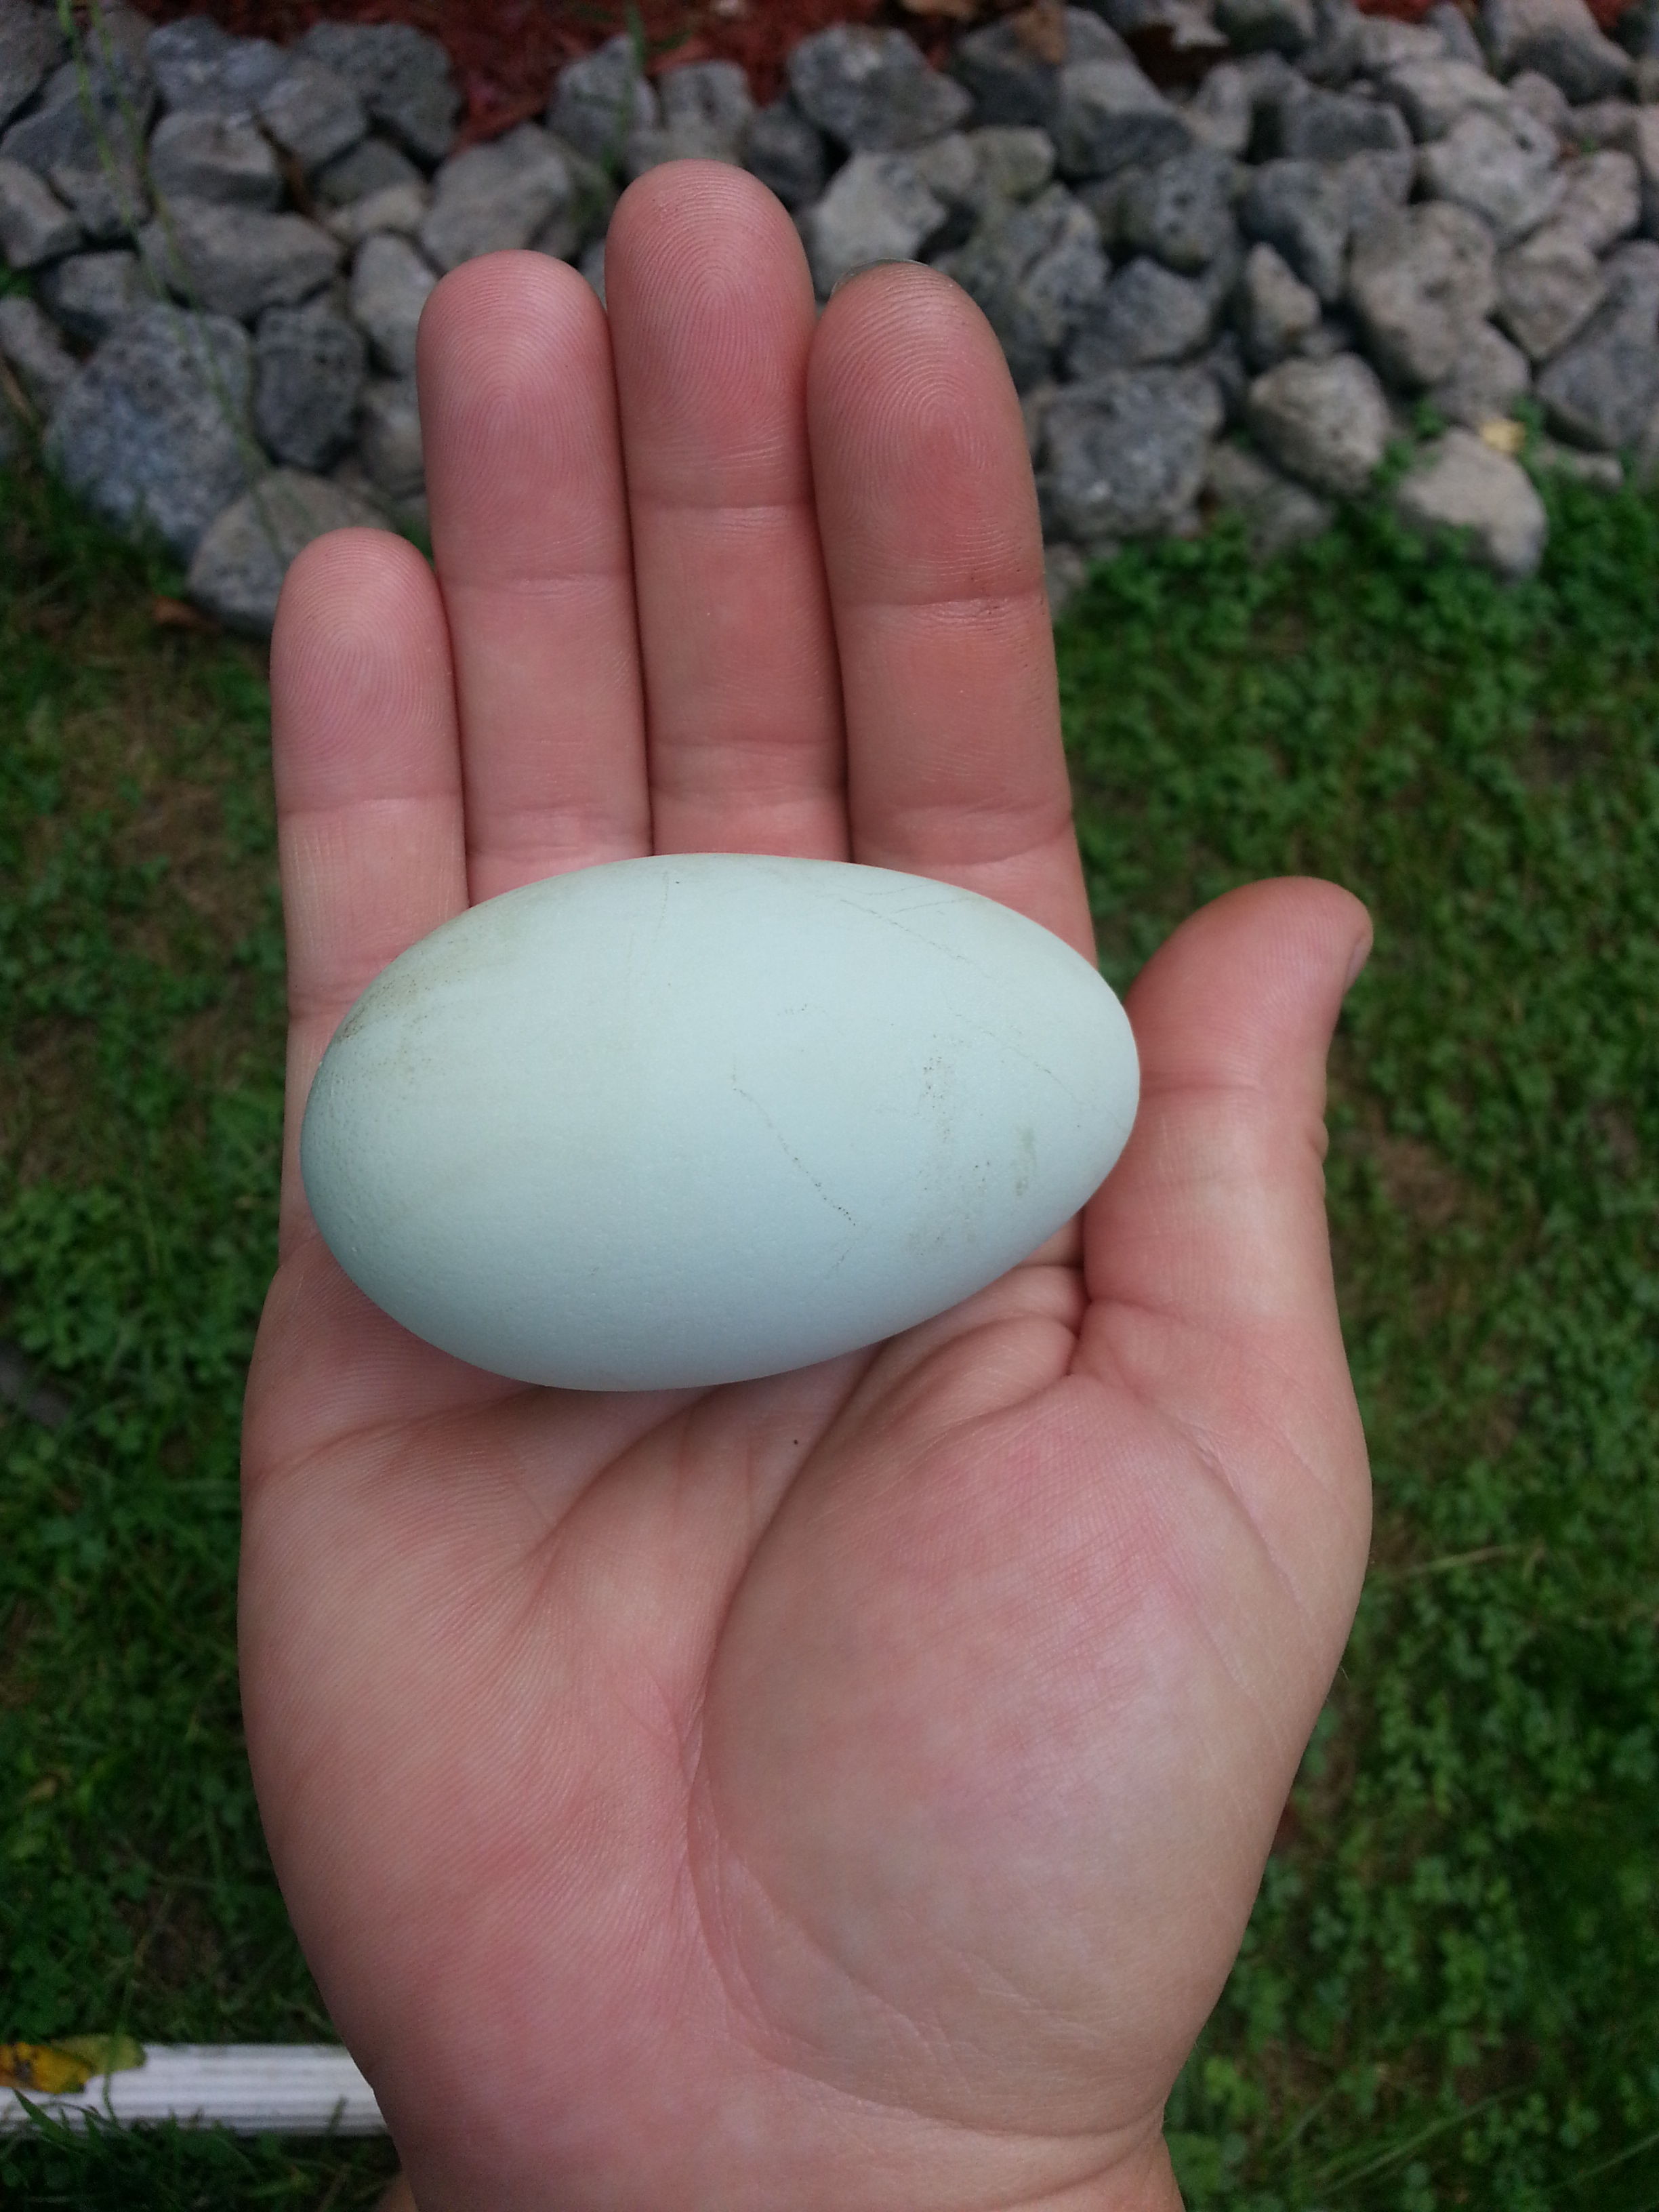 Ruby or Crybabys first egg! So excited about the color and a double yoker!
8/23/13